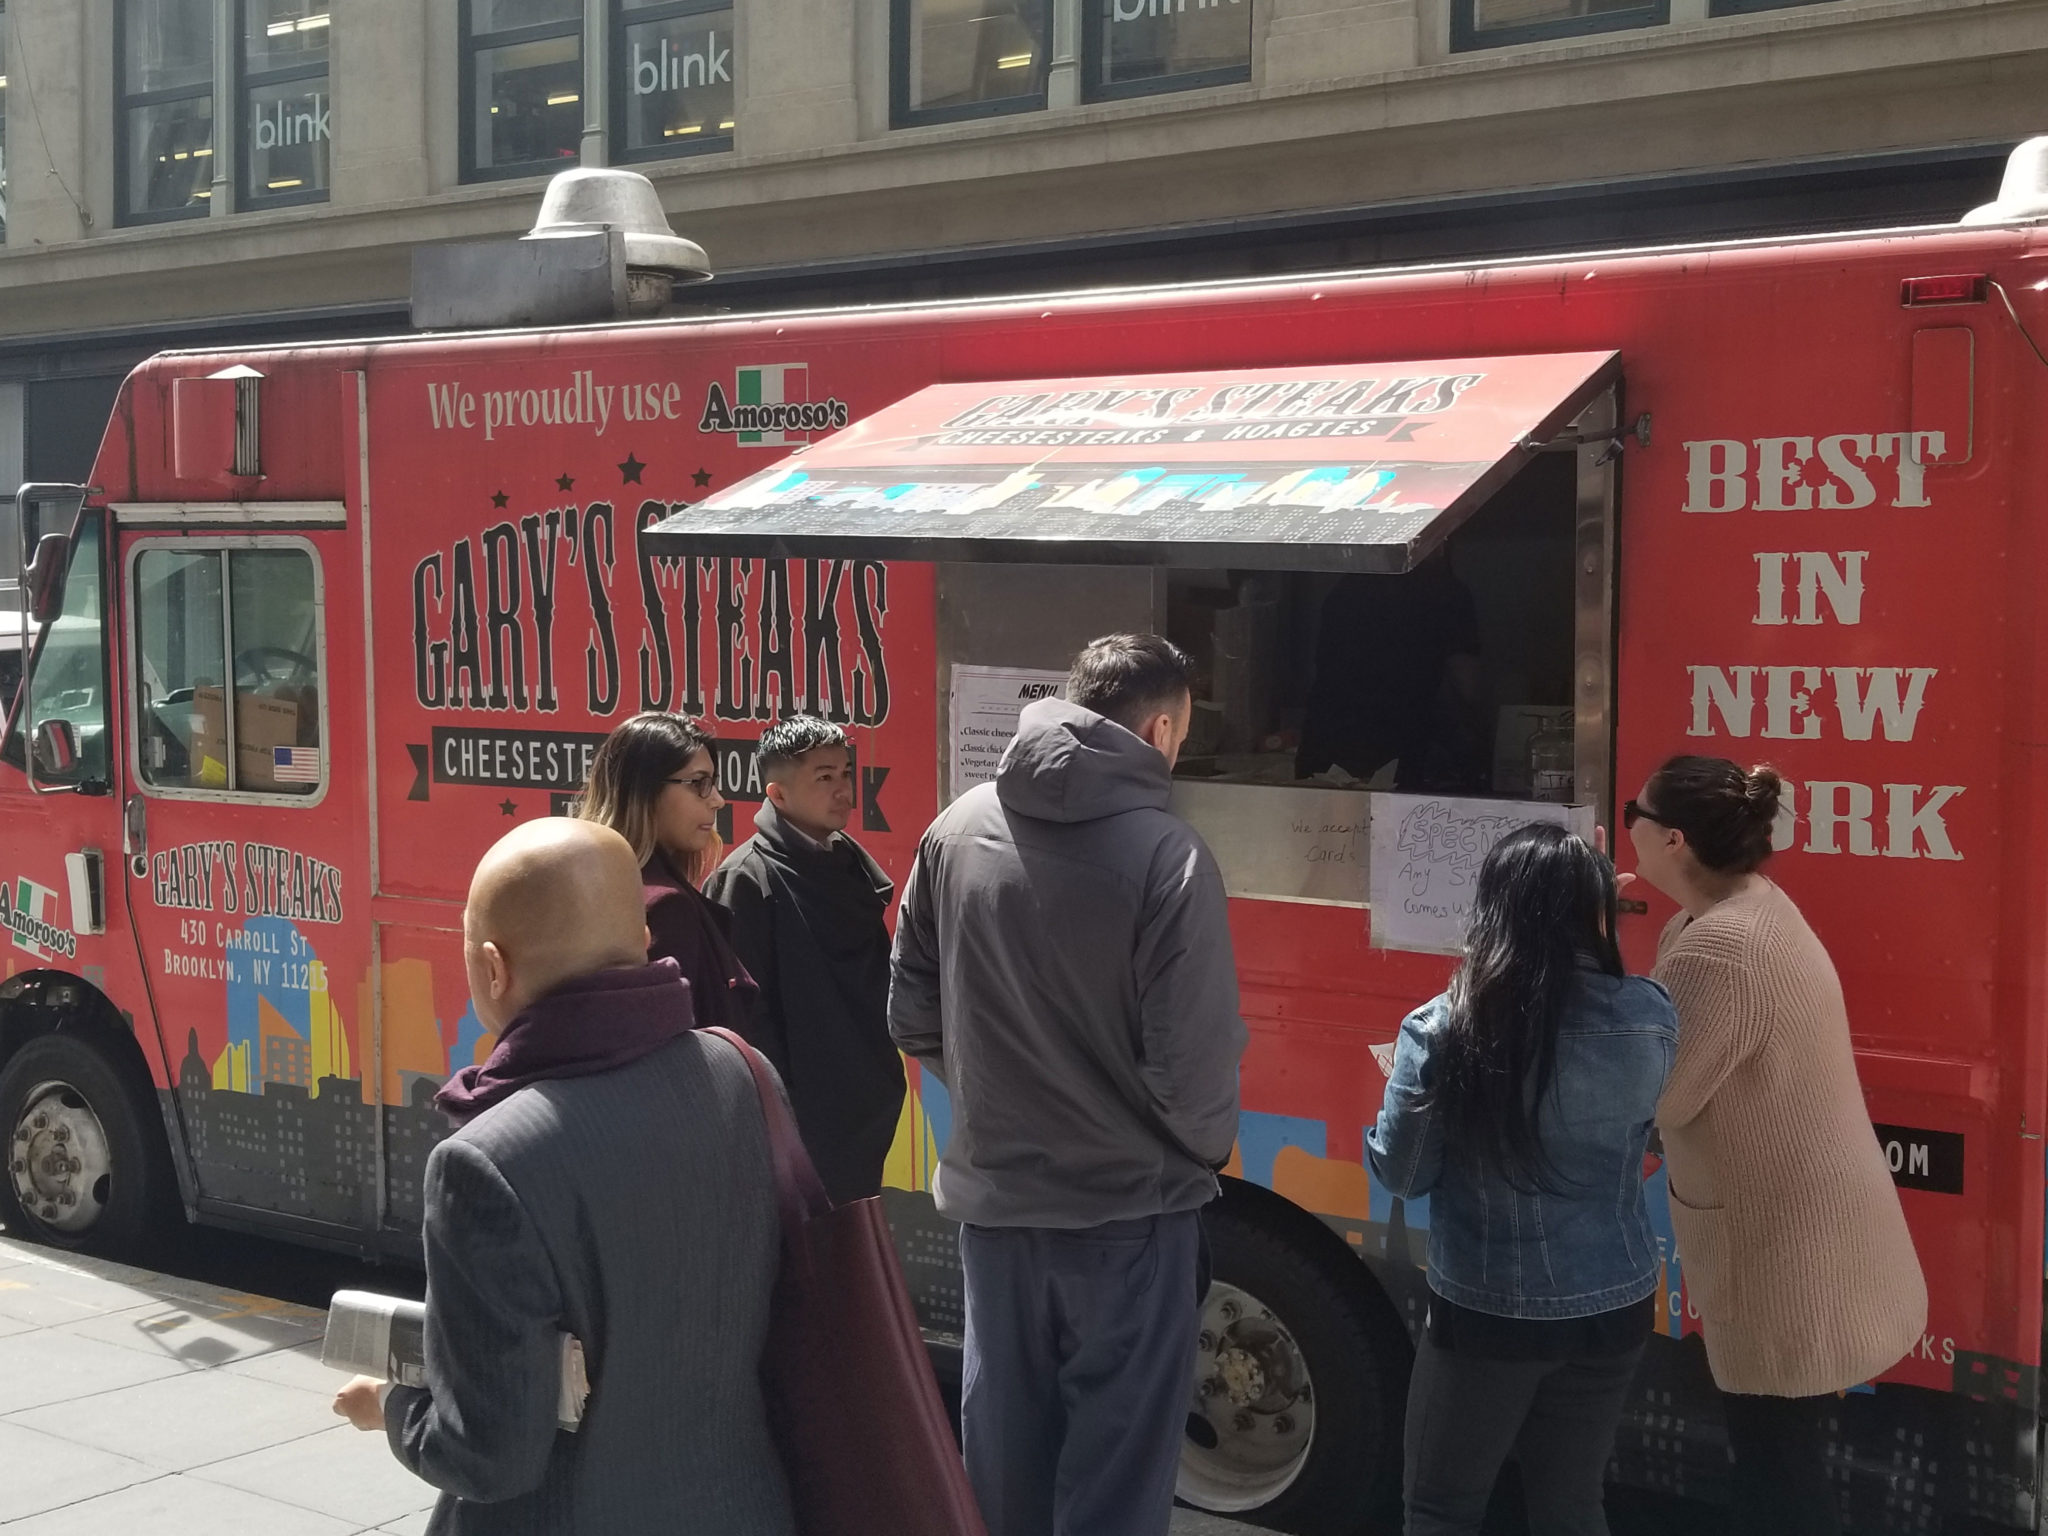 GarysSteaks Workplace Food Truck Catering for Weitz and Luxenberg at 700 Broadway New York